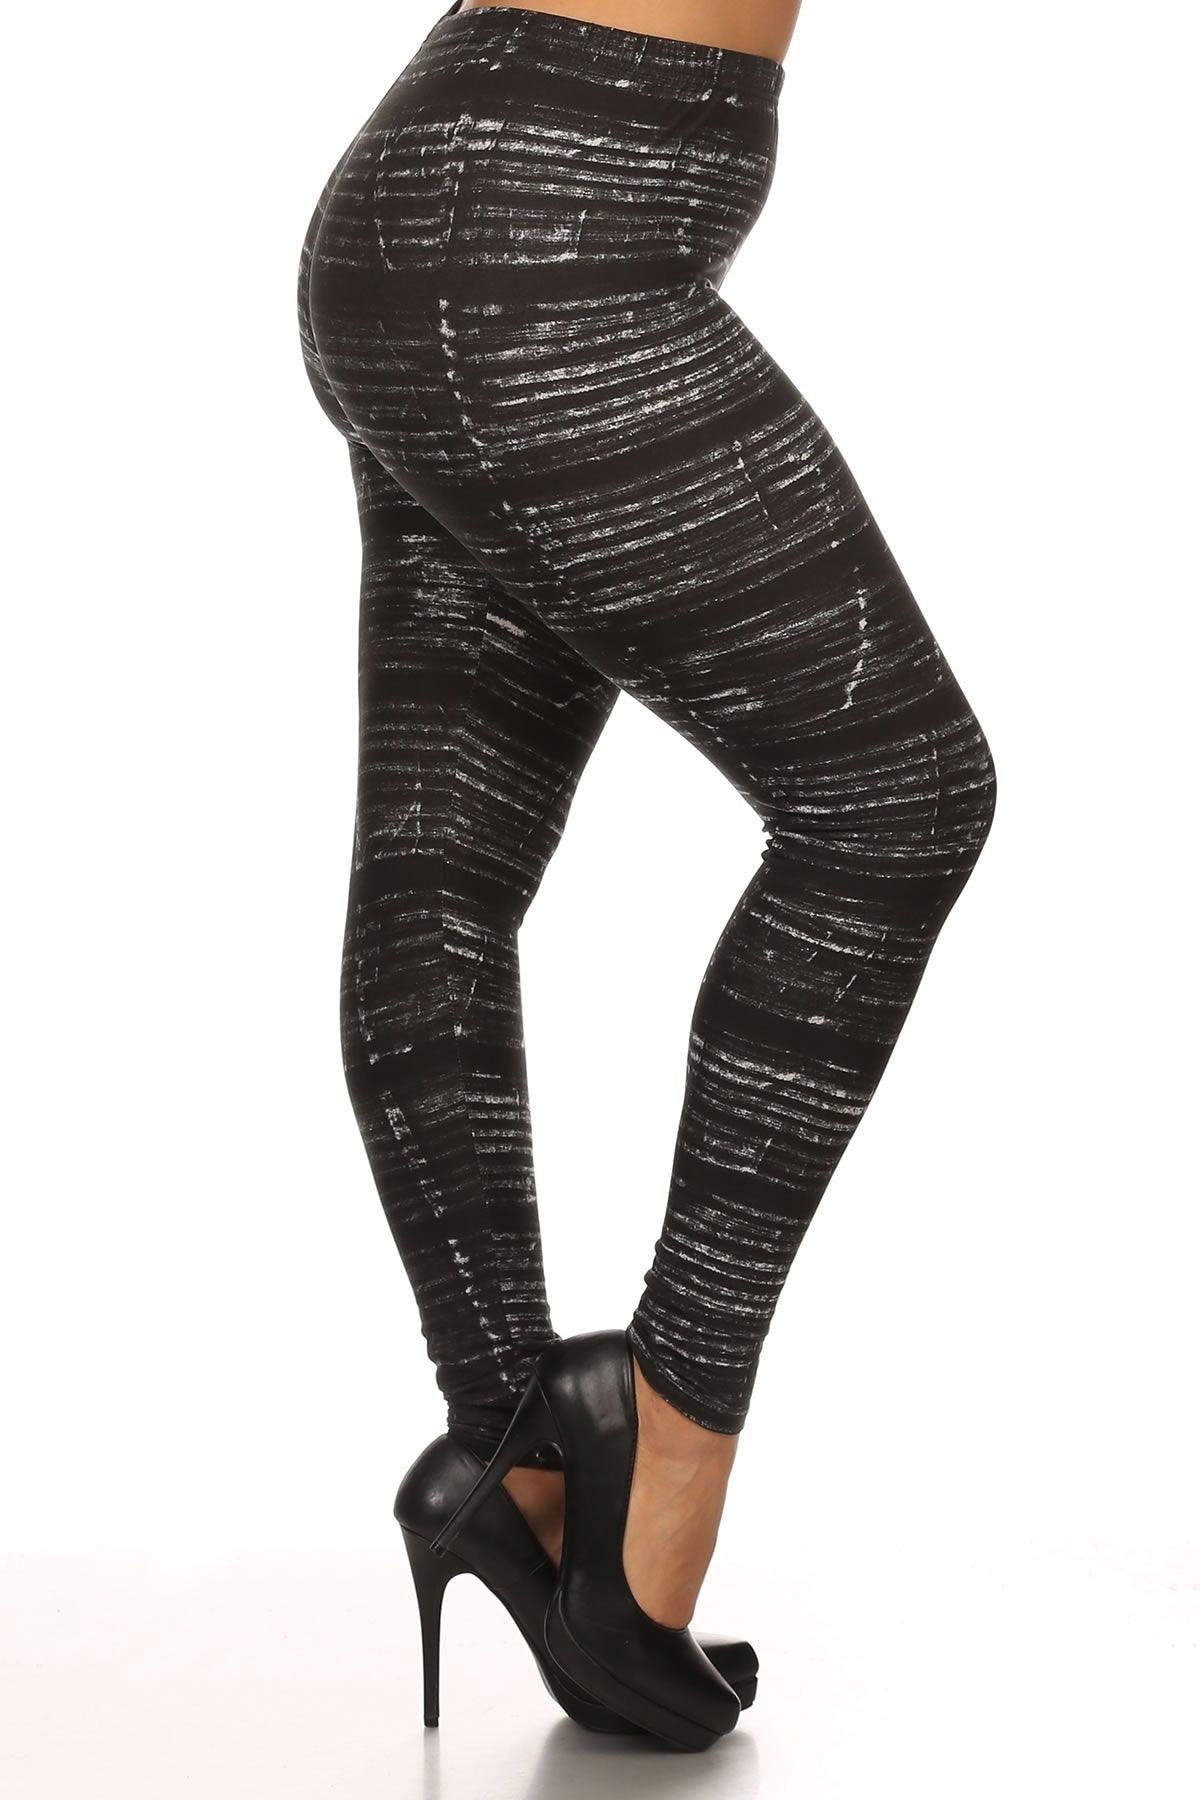 Plus Size Tie Dye Print, Full Length Leggings In A Fitted Style With A Banded High Waist.